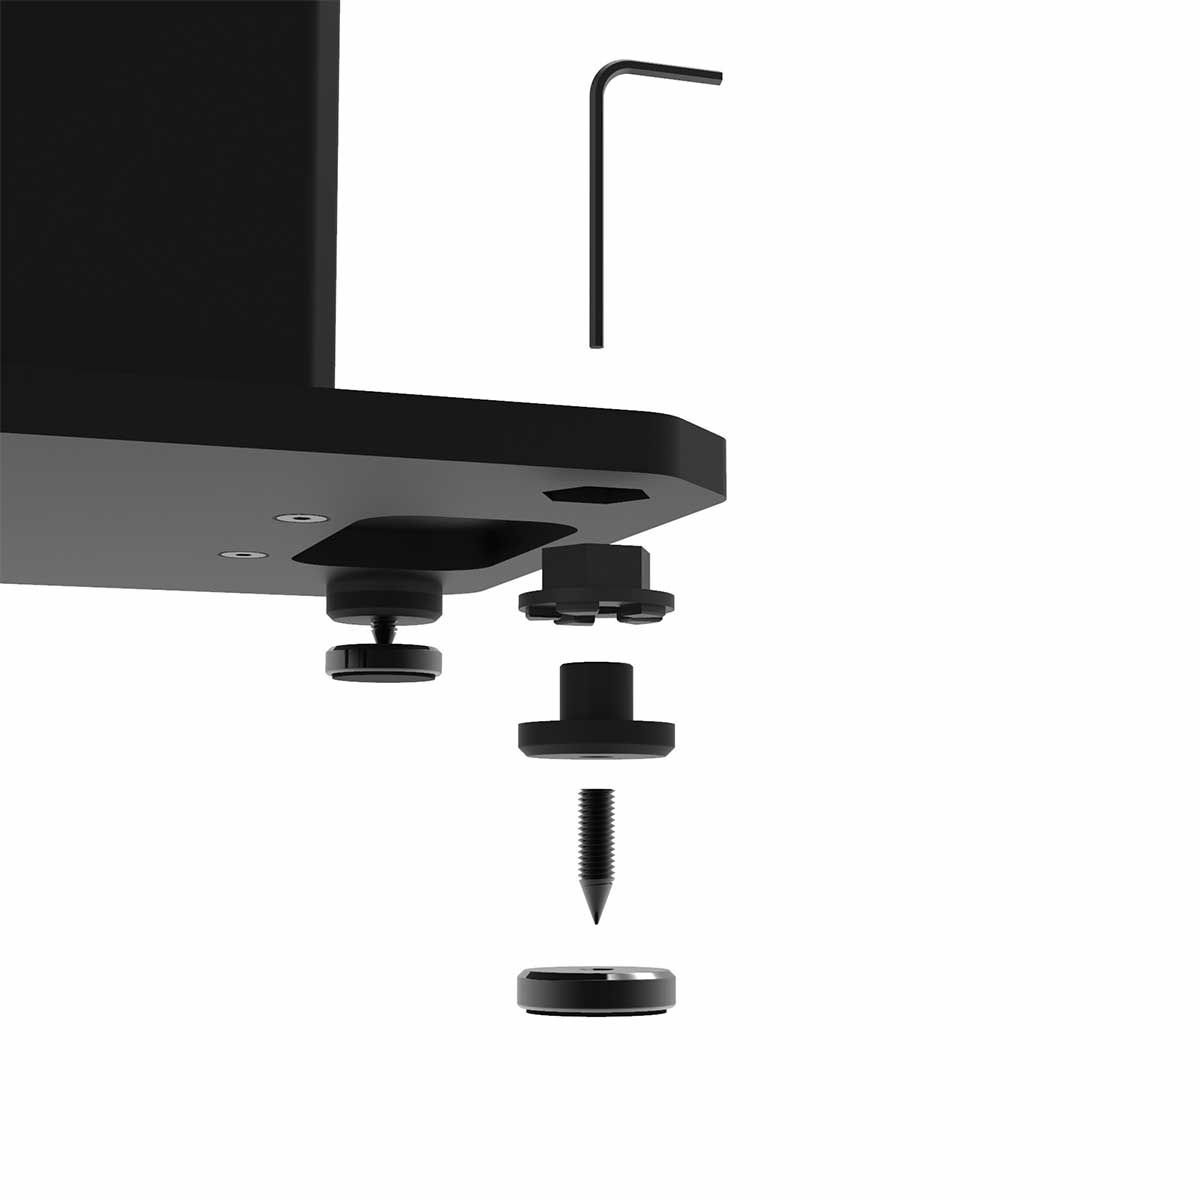 Kanto SX Speaker Stands, Black, exploded view of isolation feet